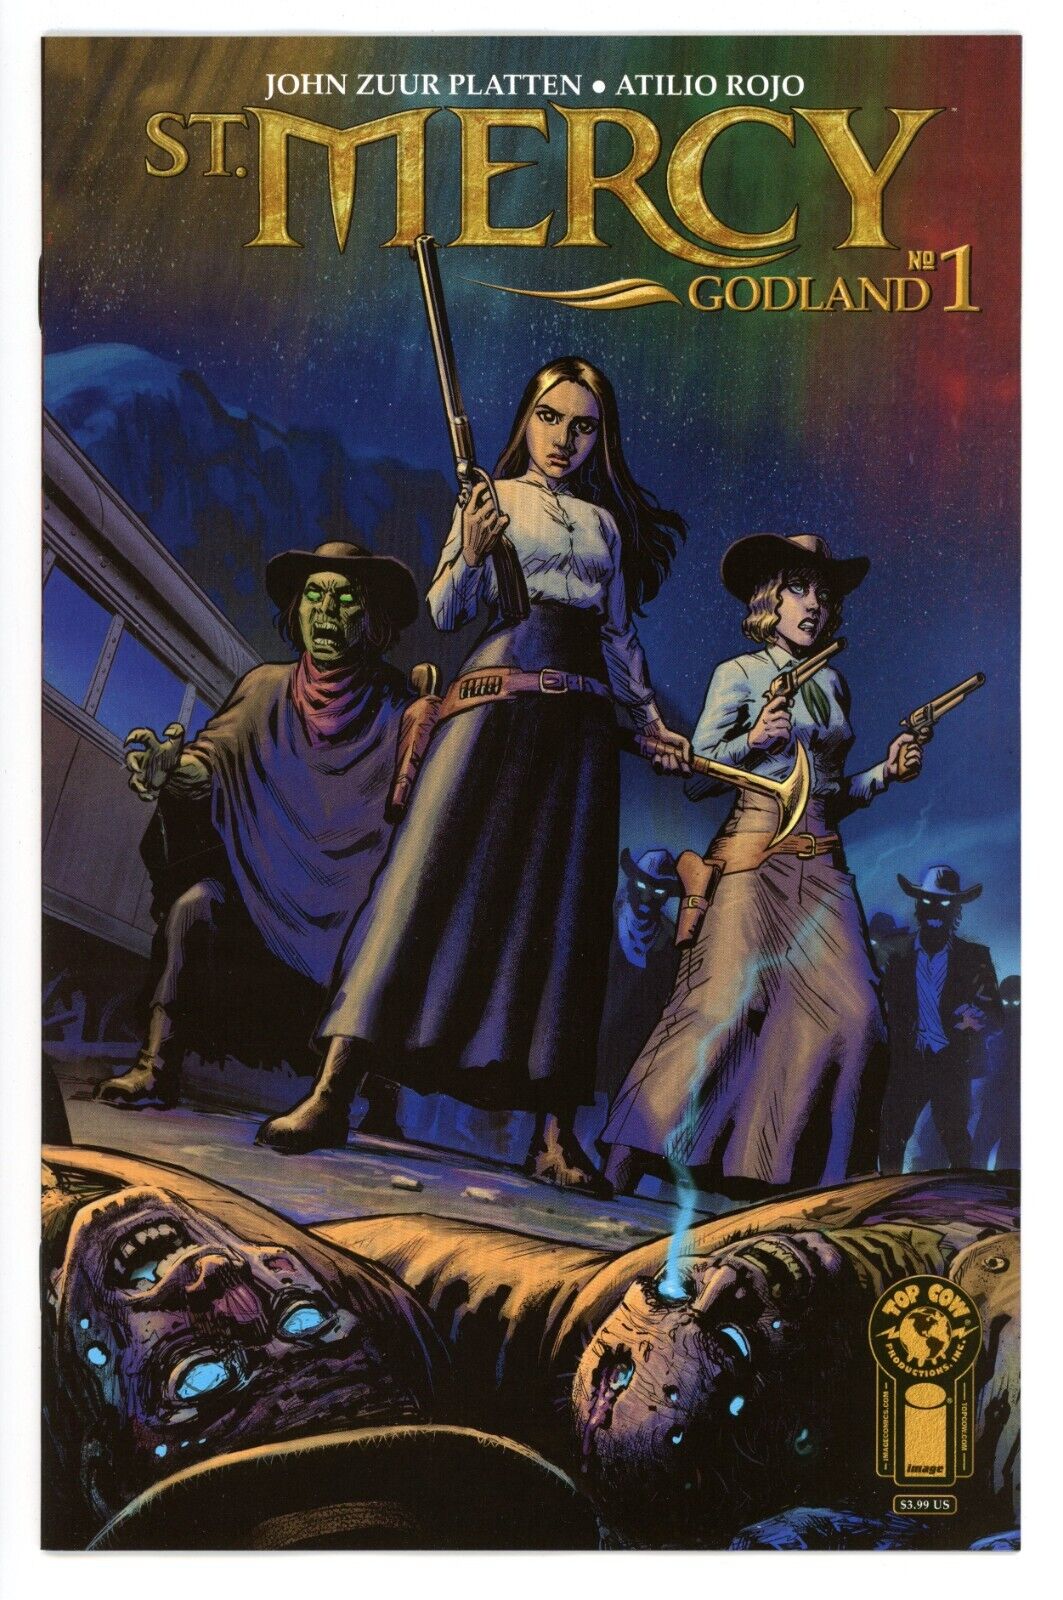 St. Mercy: Godland #1 . Cover A . NM . 🔥No Stock Images🔥